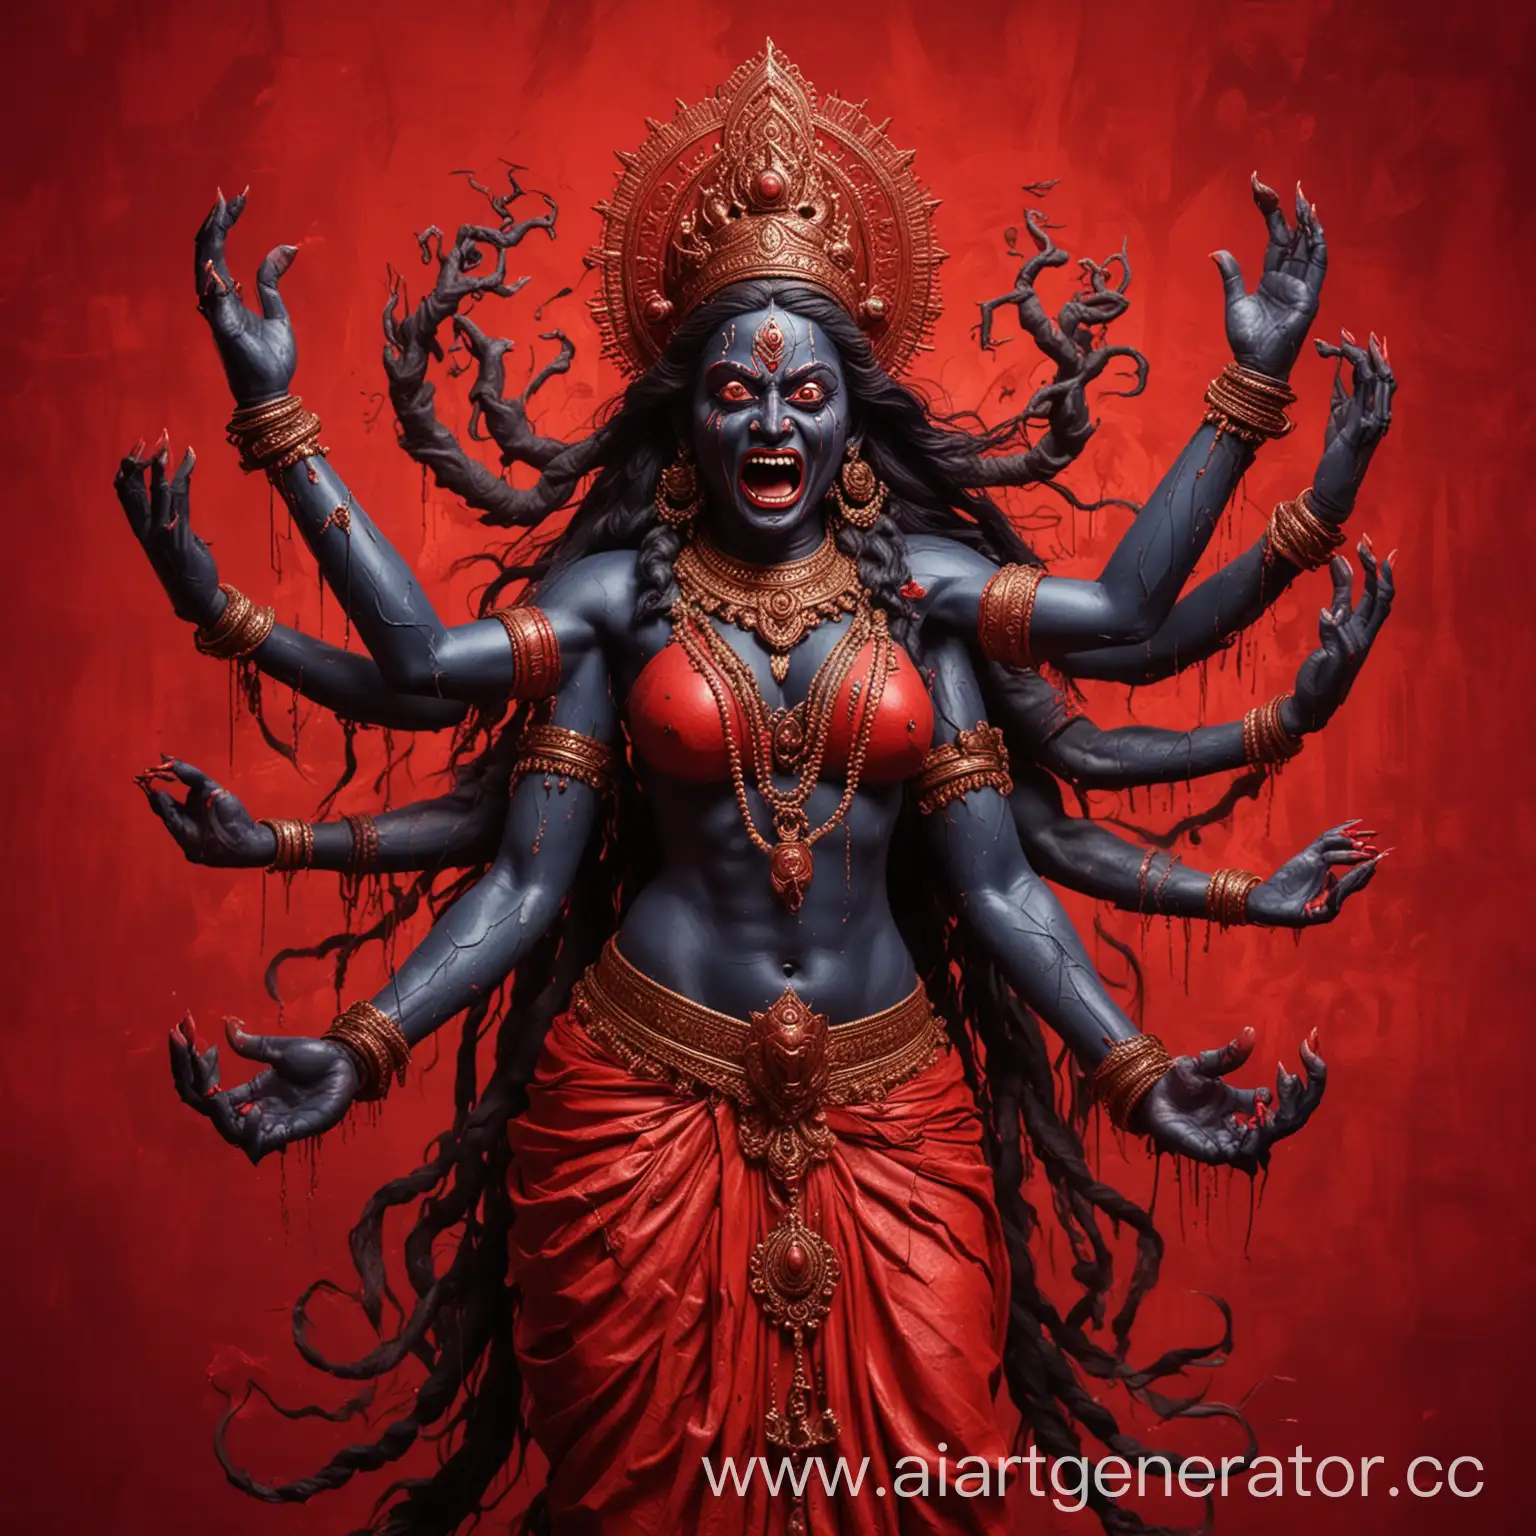 Madness-of-Goddess-Kali-FourArmed-Deity-with-Protruding-Tongue-on-Red-Background